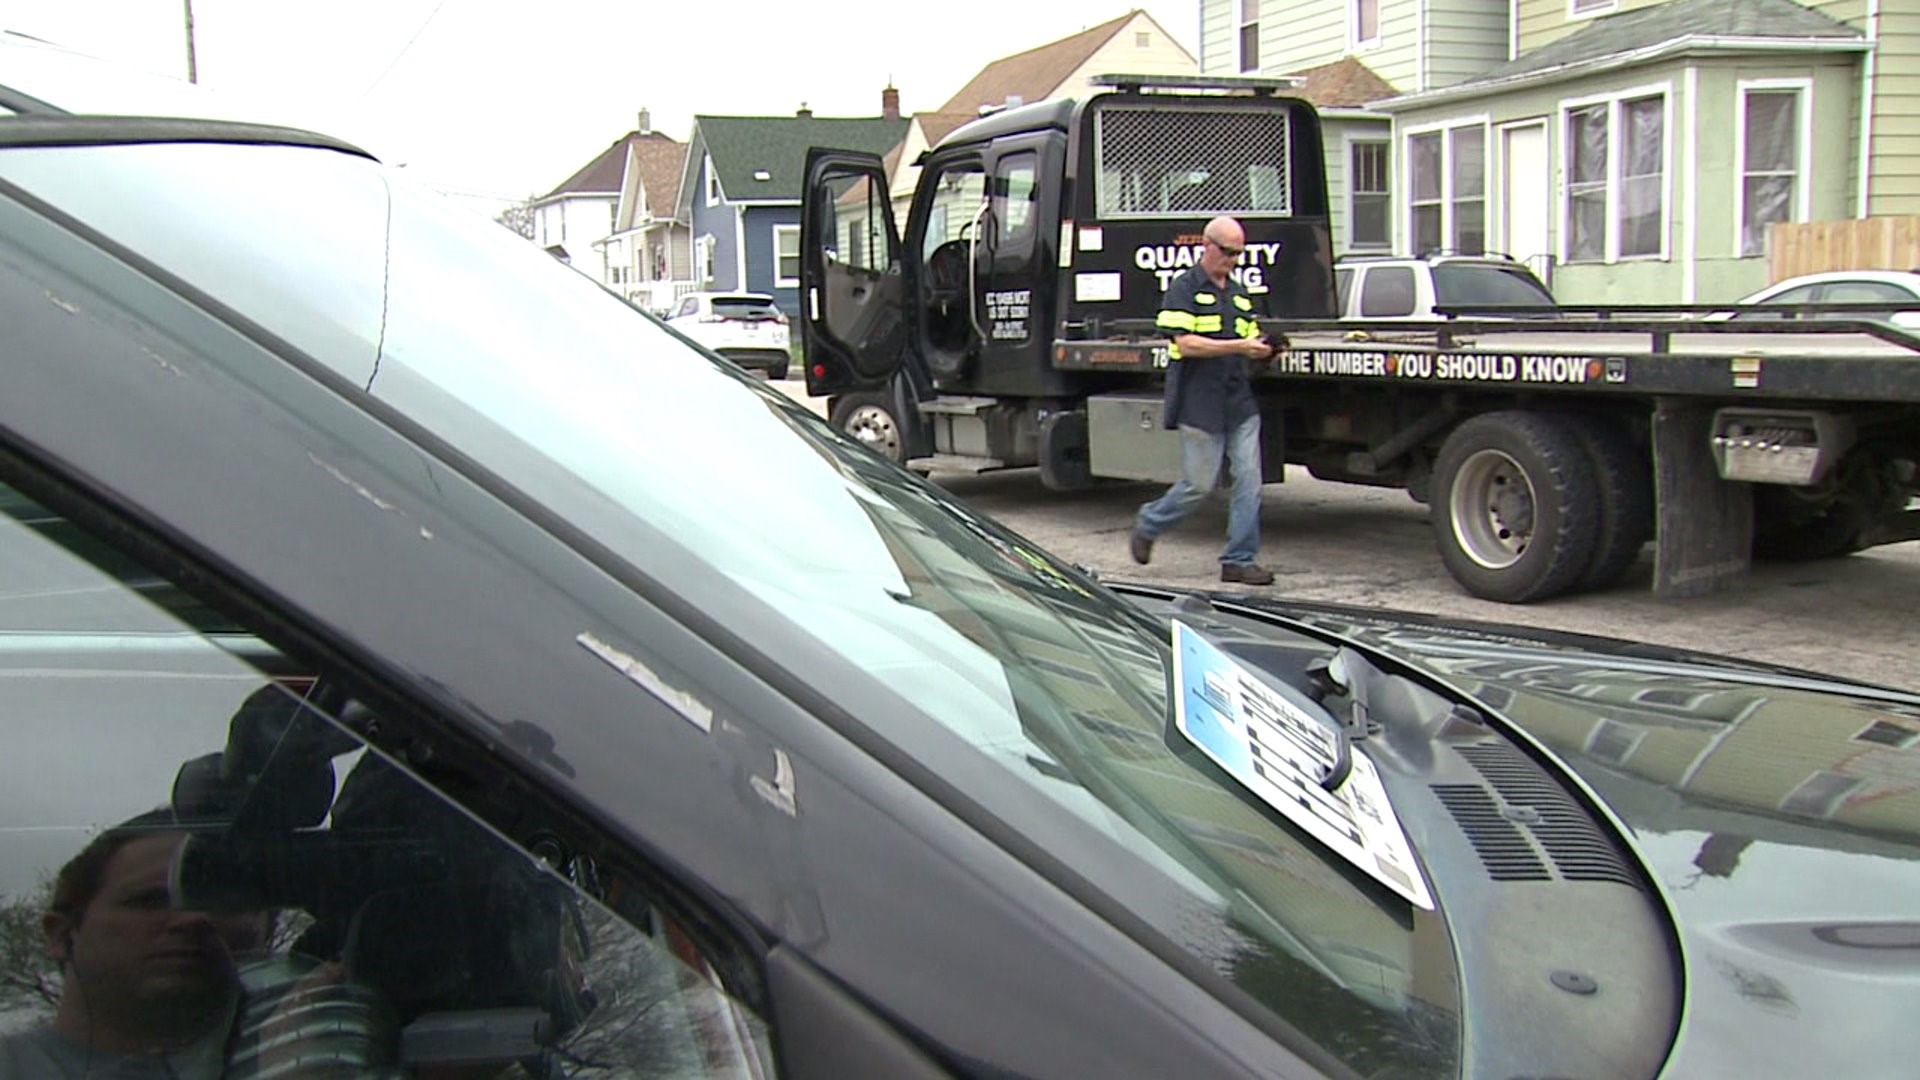 East Moline police clearing derelict vehicles for free